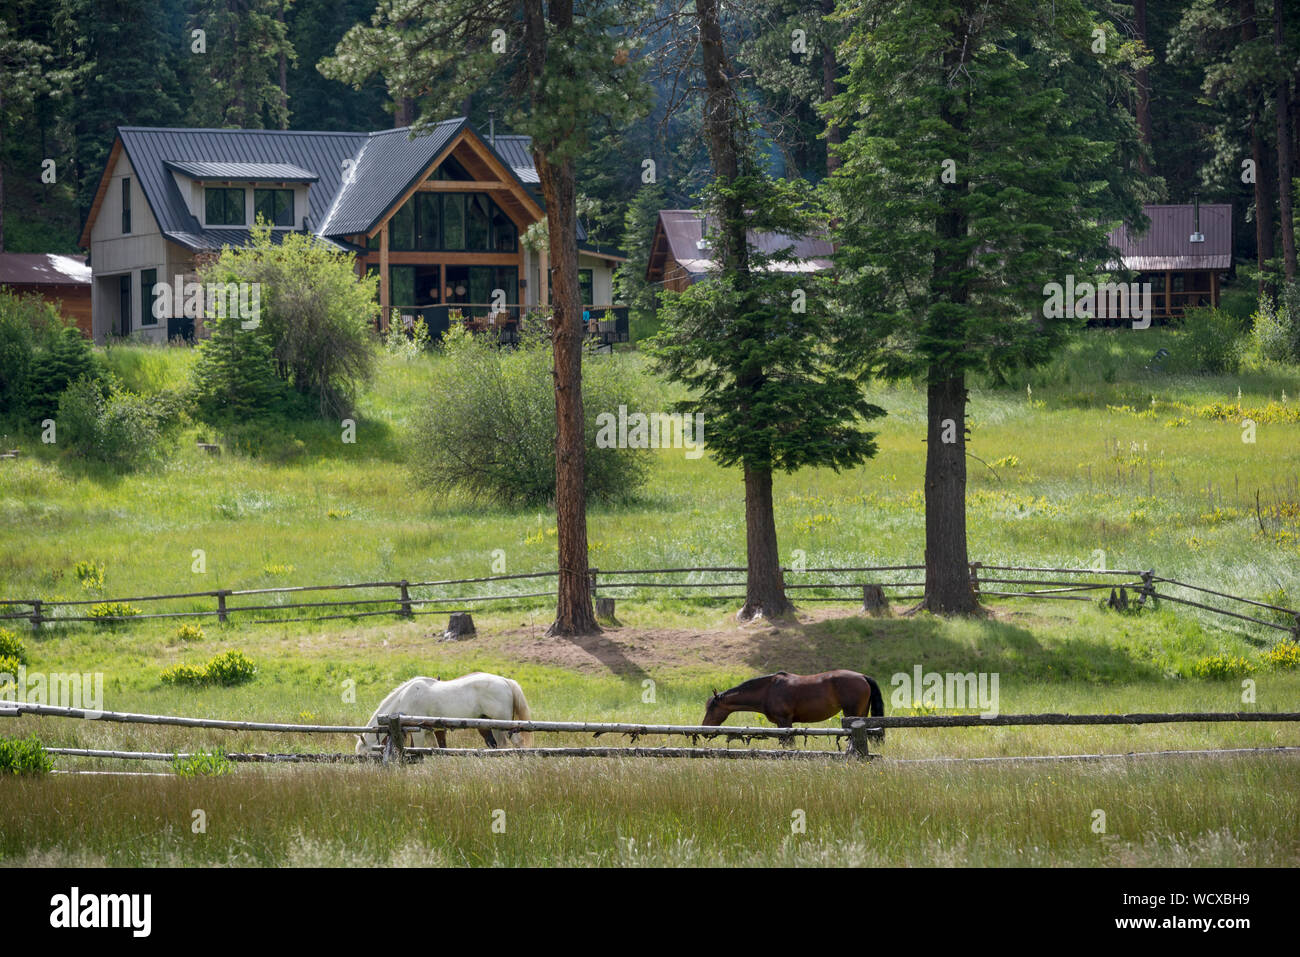 Horses at the Minam River Lodge in Oregon's Wallowa Mountains. Stock Photo